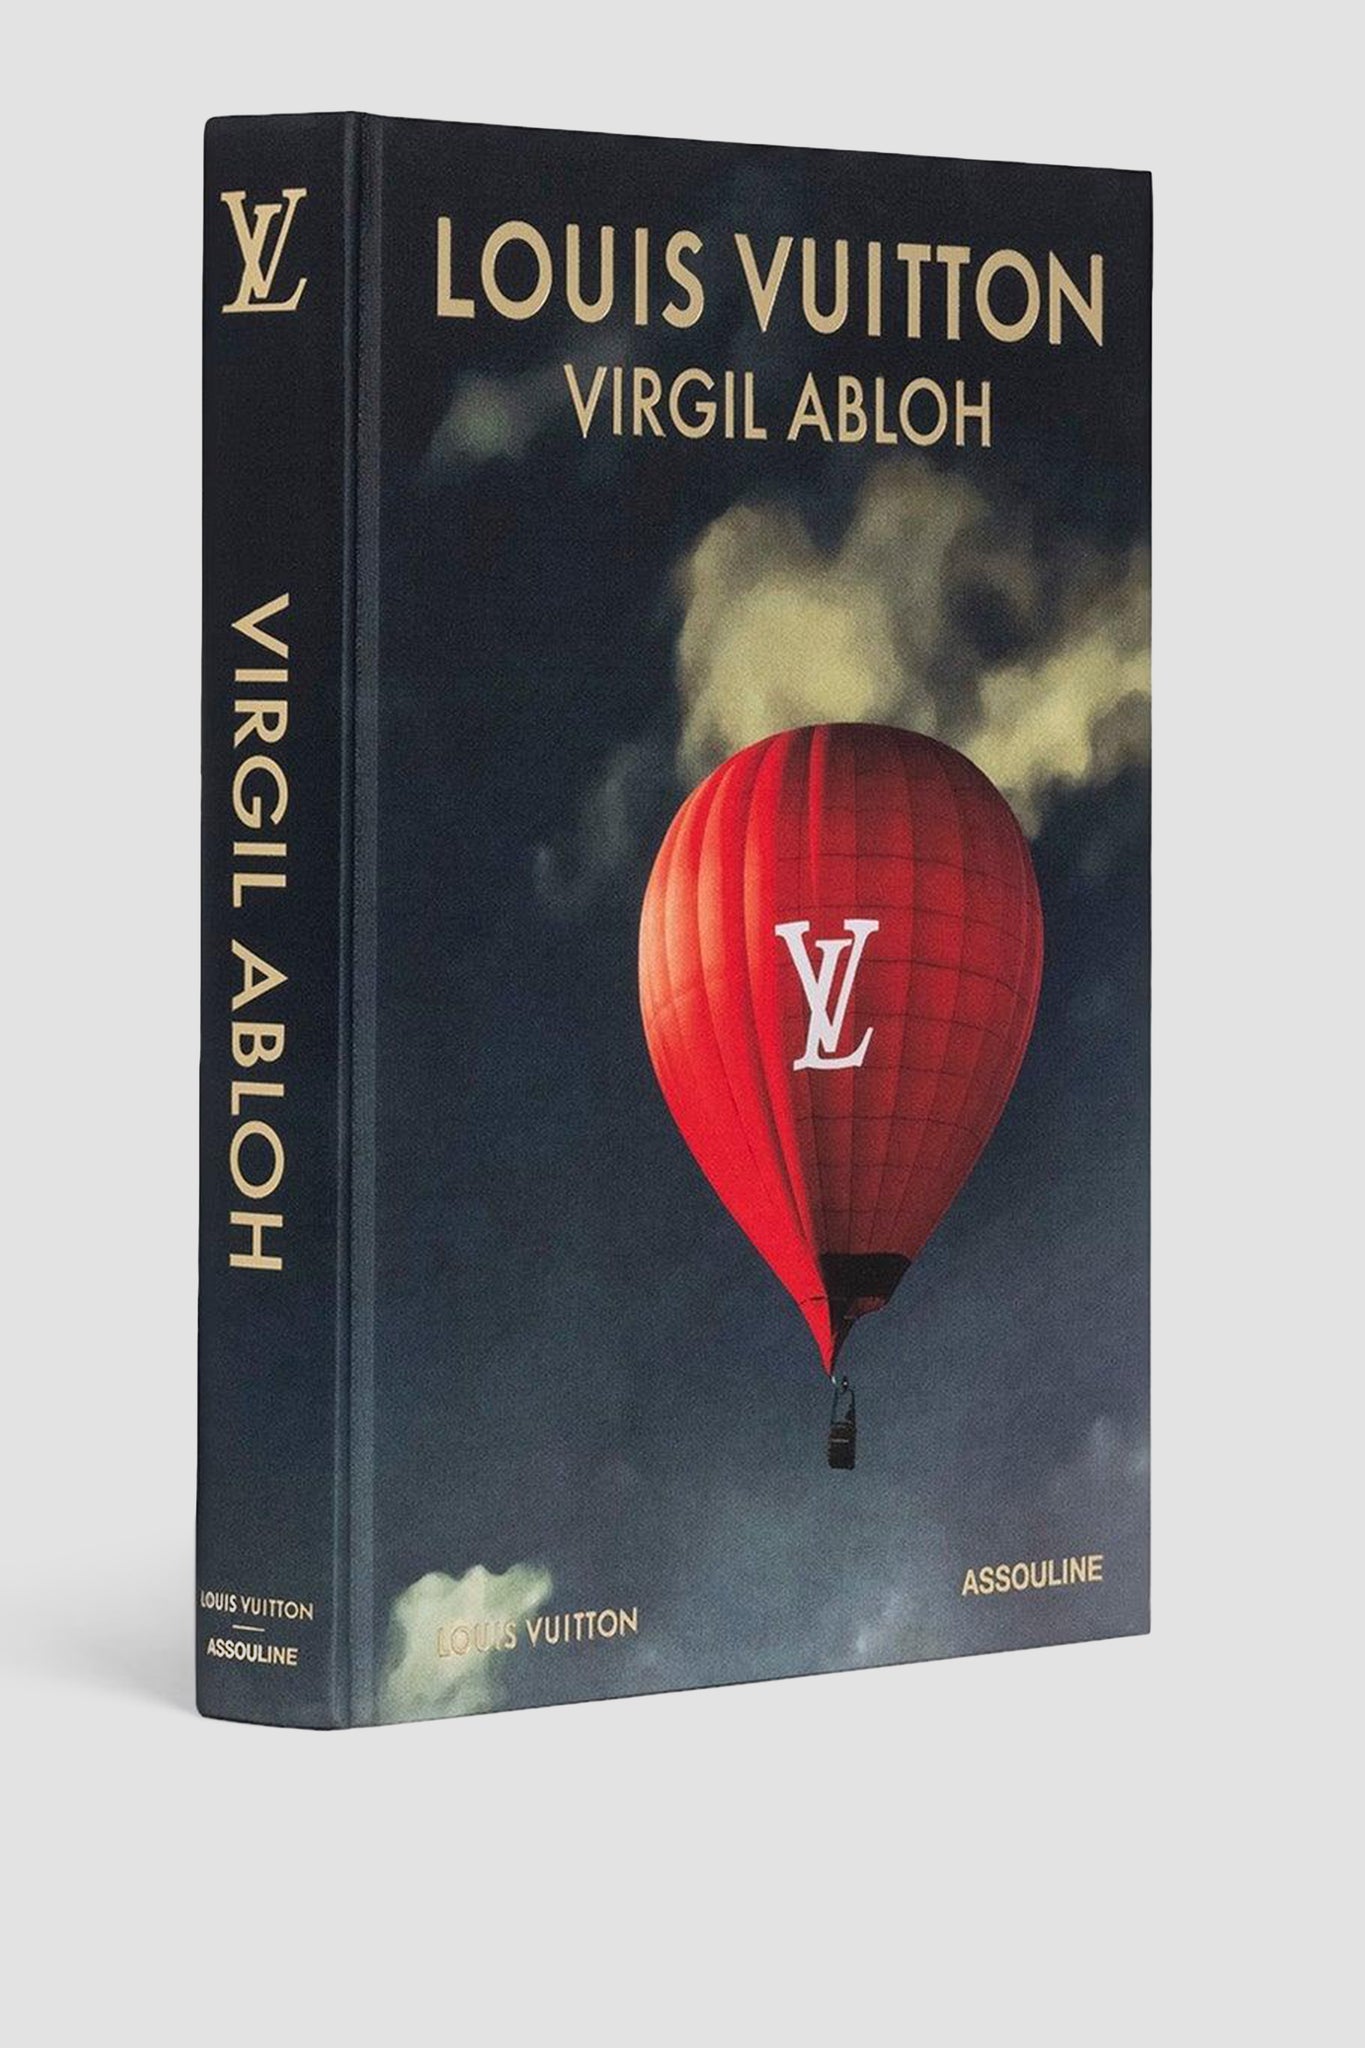 ASSOULINE Louis Vuitton: Virgil Abloh (Classic Balloon Cover) by Anders Christian Madsen